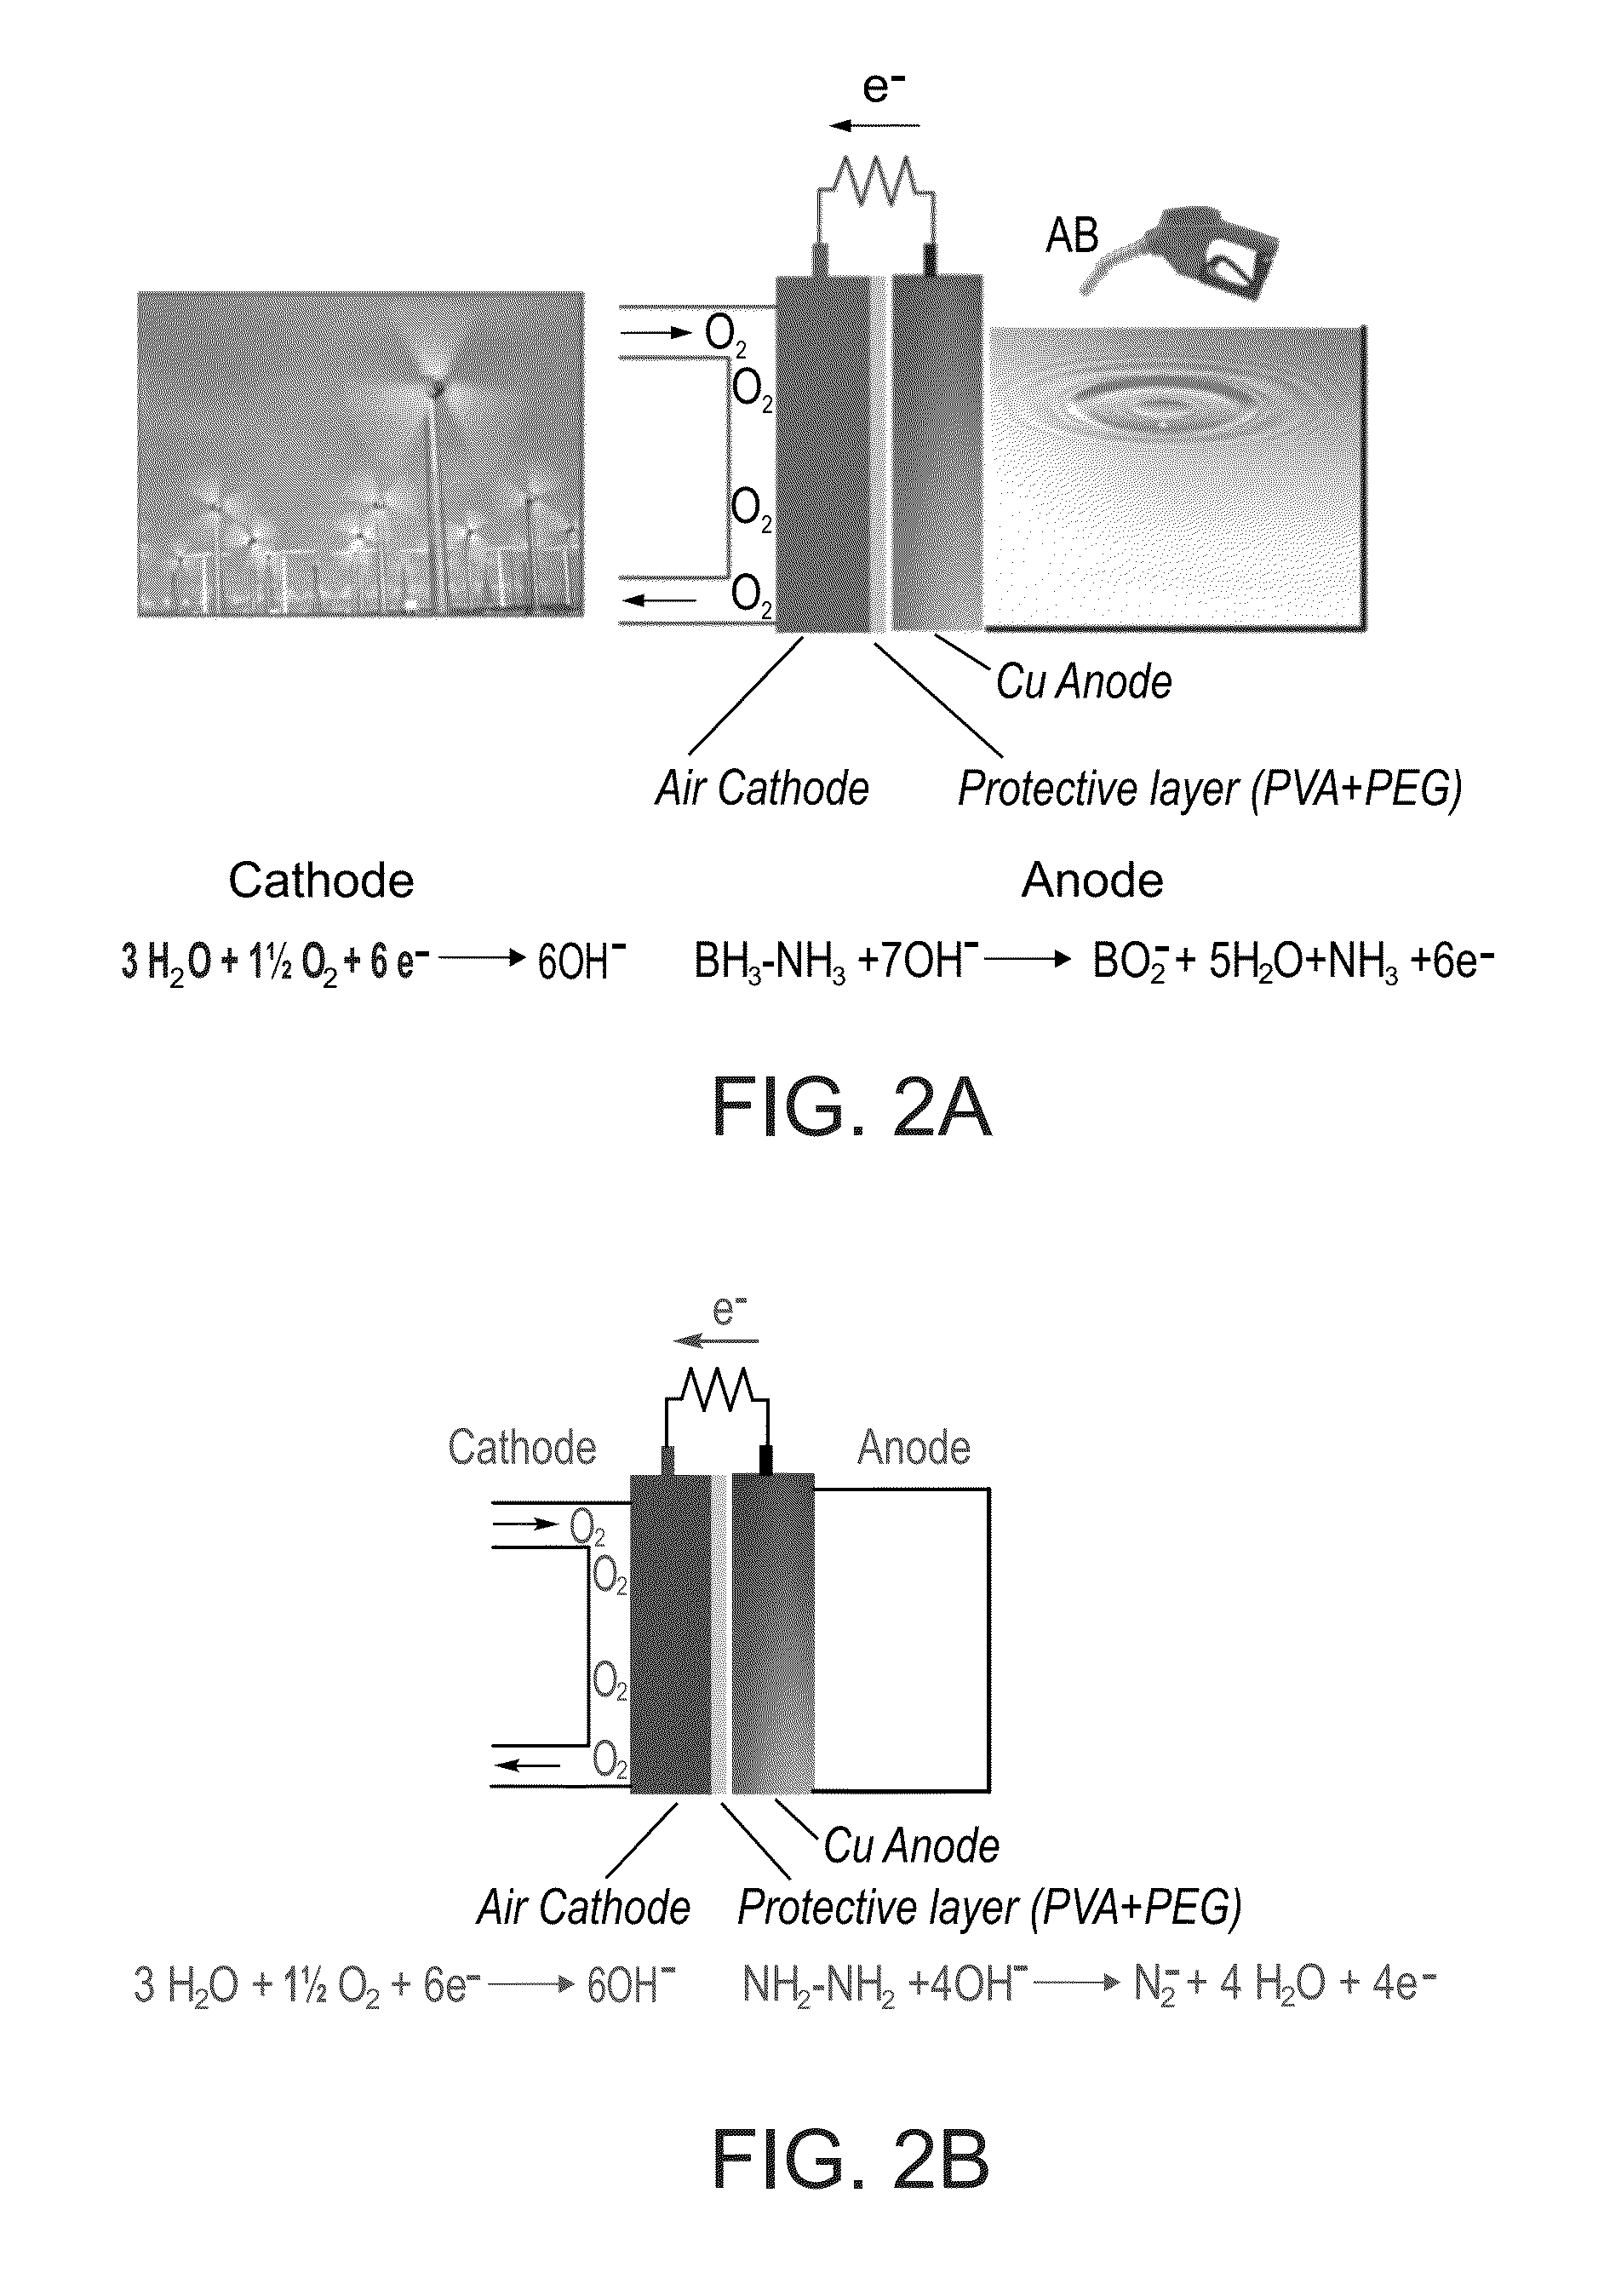 Direct liquid fuel cell having ammonia borane, hydrazine, derivatives thereof or/and mixtures thereof as fuel